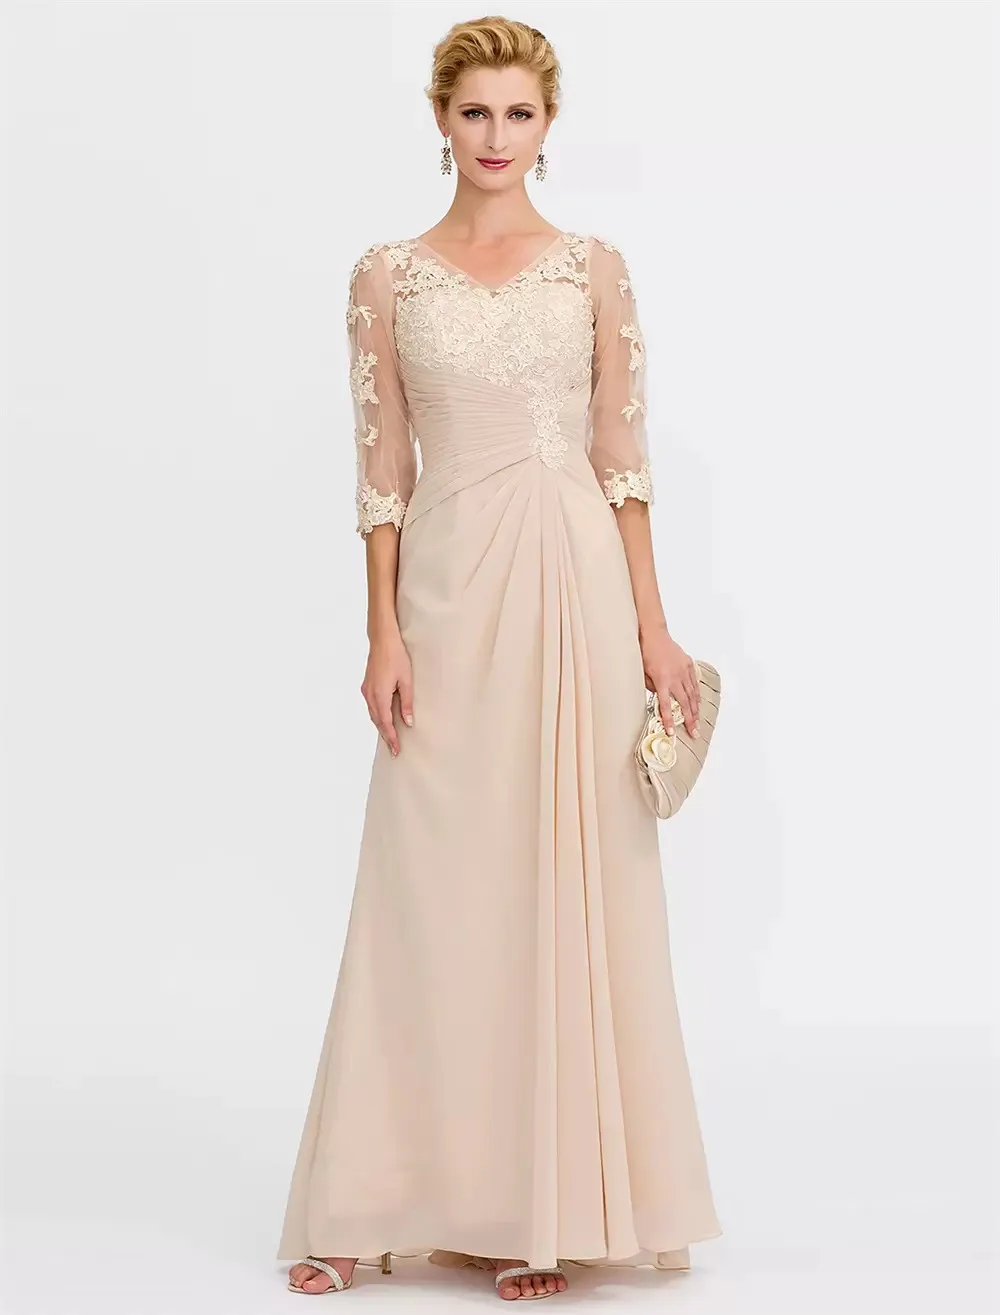 

Sheath / Column Mother of the Bride Dress Elegant See Through V Neck Floor Length Chiffon Sheer Lace Half Sleeve with Appliques